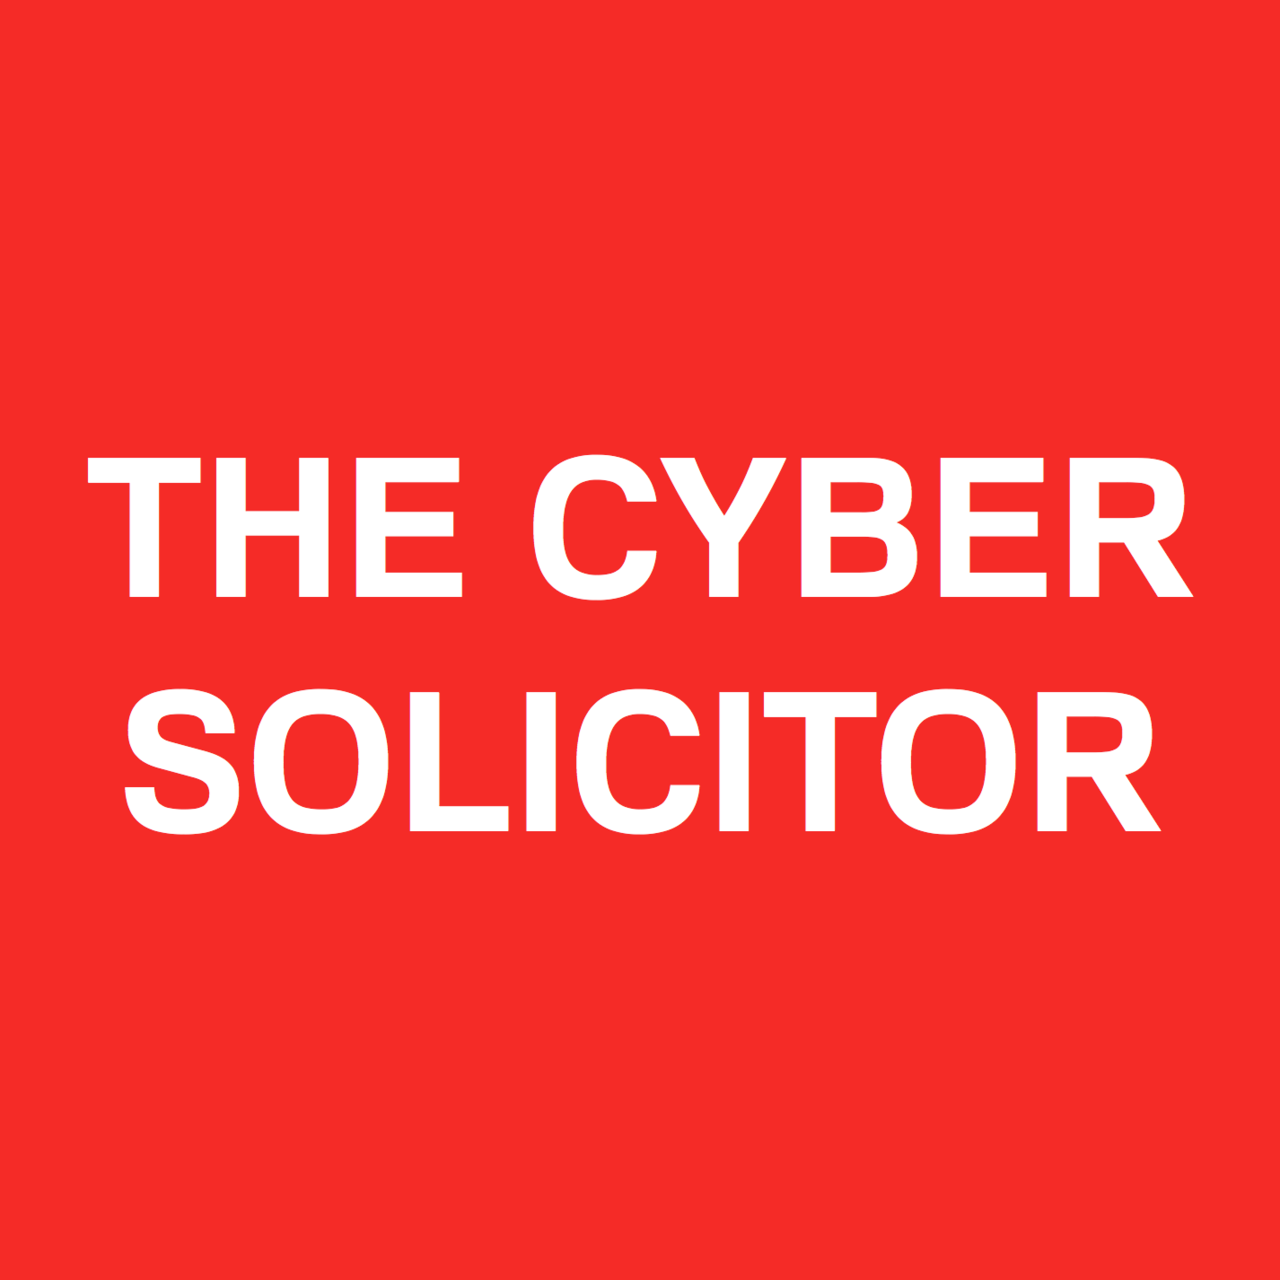 The Cyber Solicitor